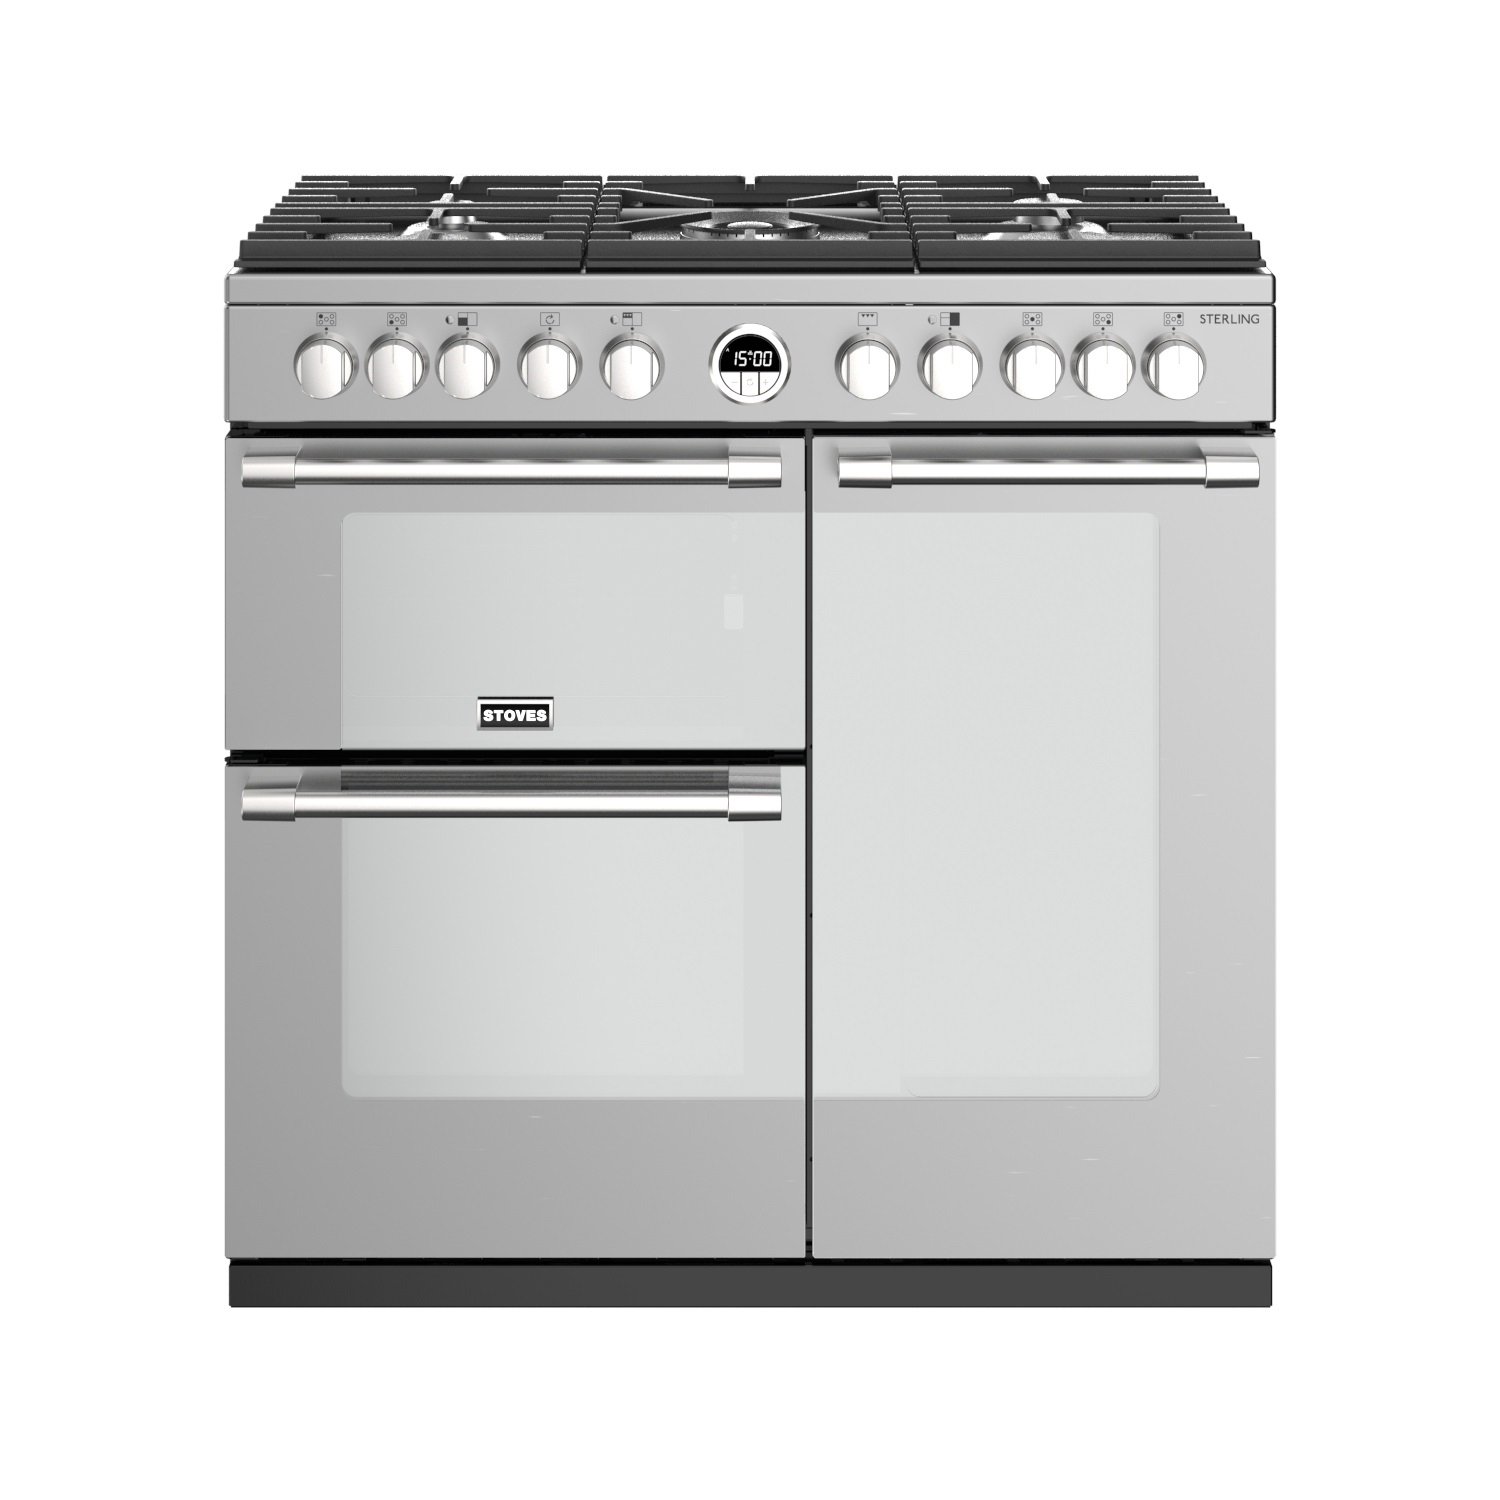 90cm Dual Fuel Range Cooker With A 5 Burner Gas Hob, Conventional Oven & Grill, Multifunction Main Oven And Tall Fanned Oven.